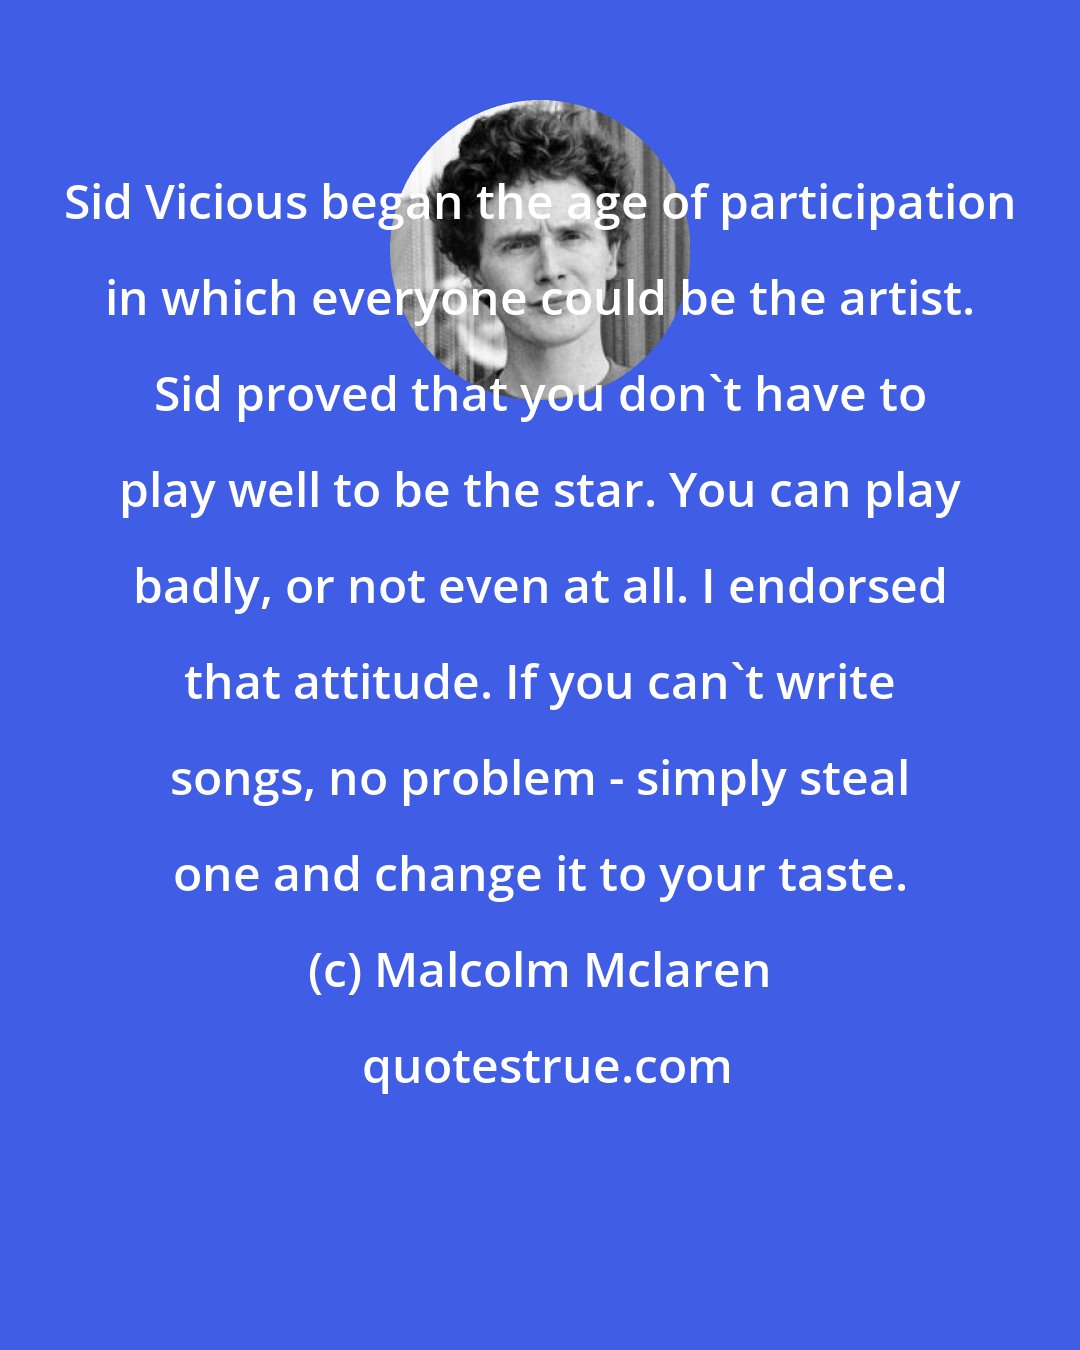 Malcolm Mclaren: Sid Vicious began the age of participation in which everyone could be the artist. Sid proved that you don't have to play well to be the star. You can play badly, or not even at all. I endorsed that attitude. If you can't write songs, no problem - simply steal one and change it to your taste.